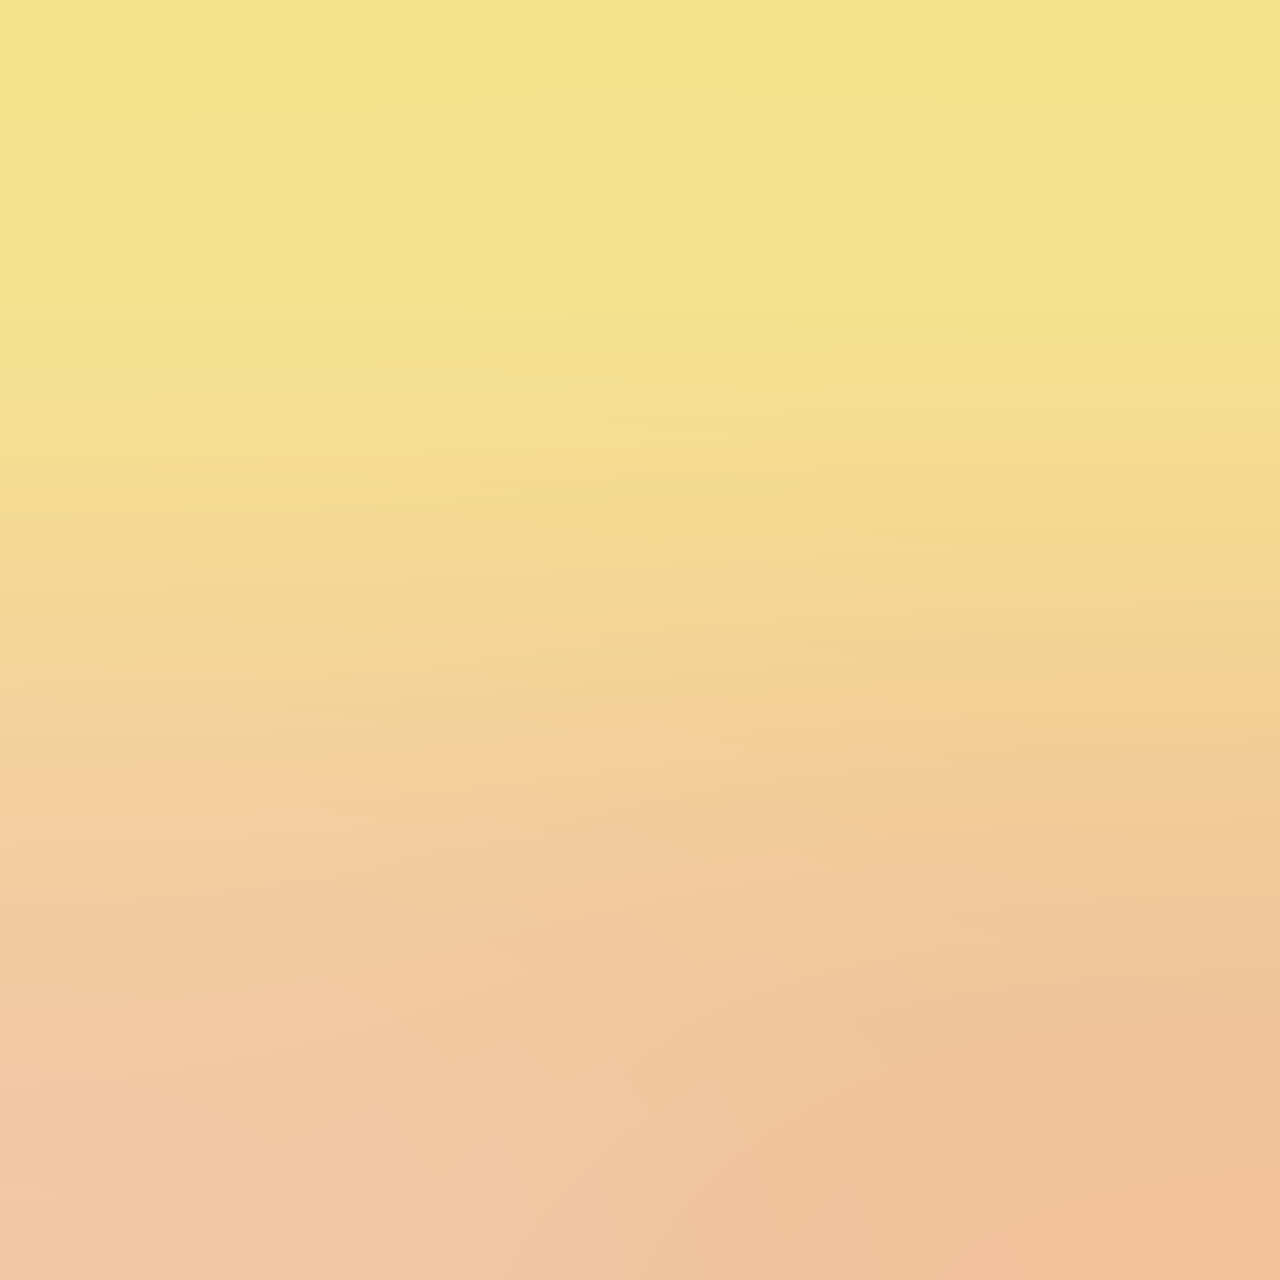 A vibrant and creative yellow gradient background.